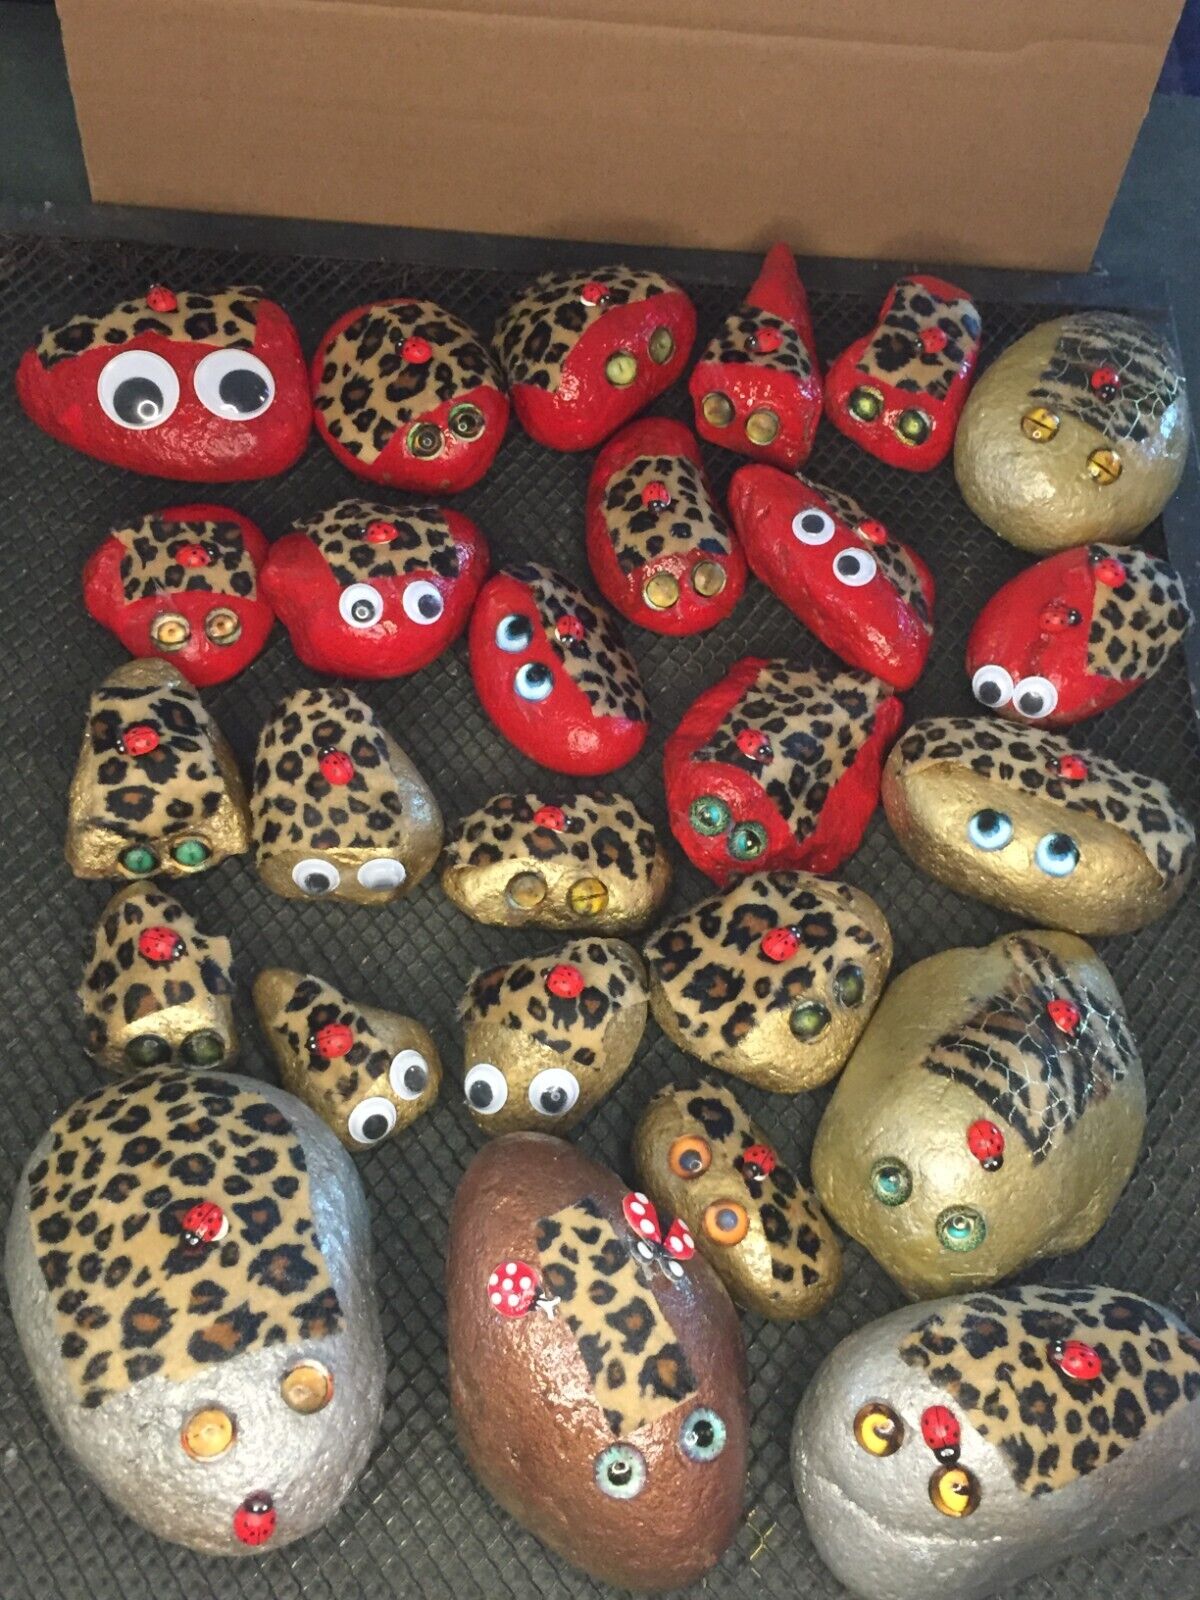 YOUR OWN PET ROCK FACTORY CREATE YOUR OWN MASTER PIECES USING METALLIC PAINTS.